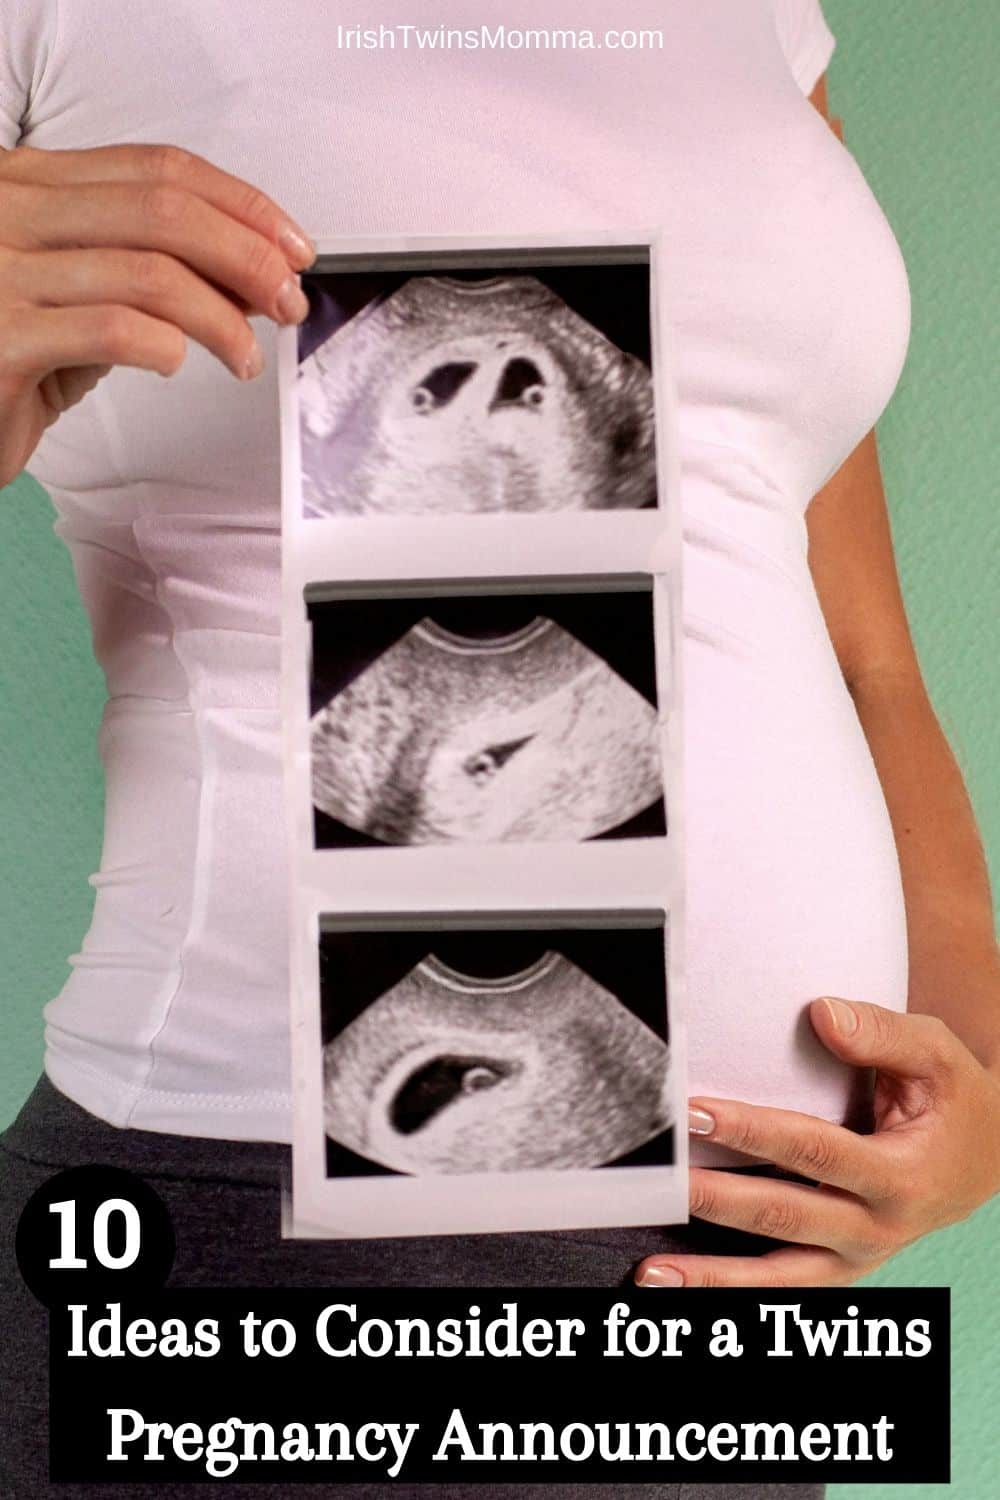 10 Ideas to Consider for a Twins Pregnancy Announcement